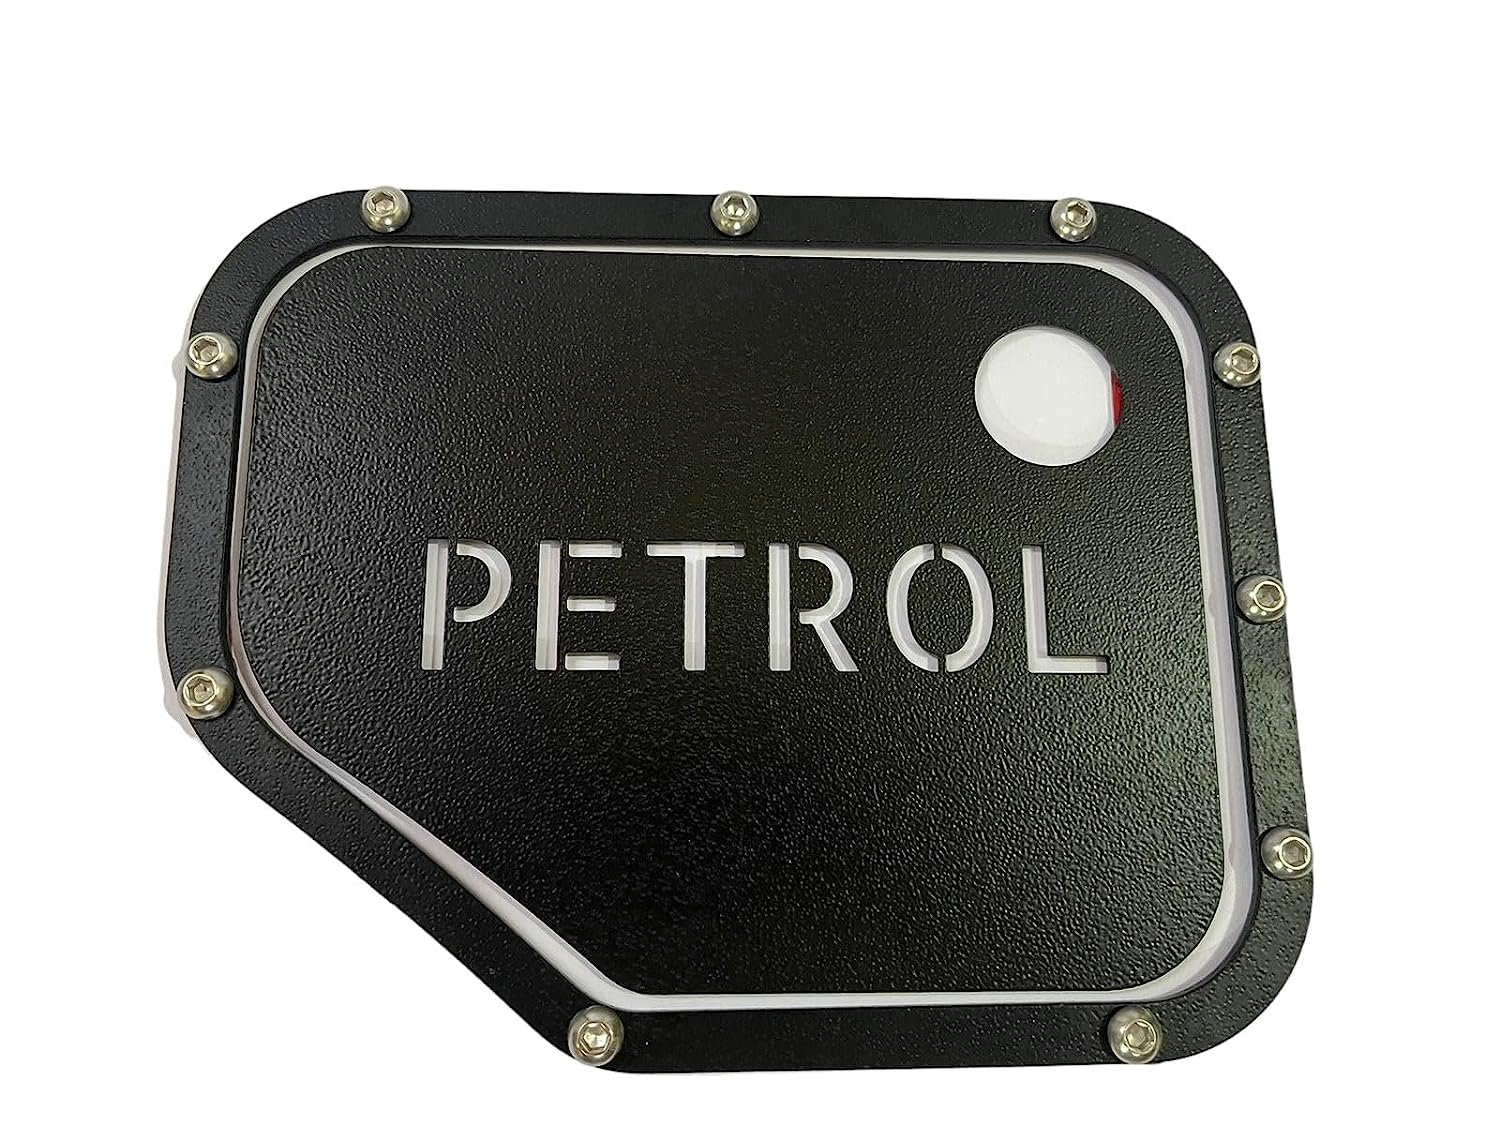 Cloudsale  Fuel Filler Cover 2023 Compatible With  Thar (Petrol) Image 